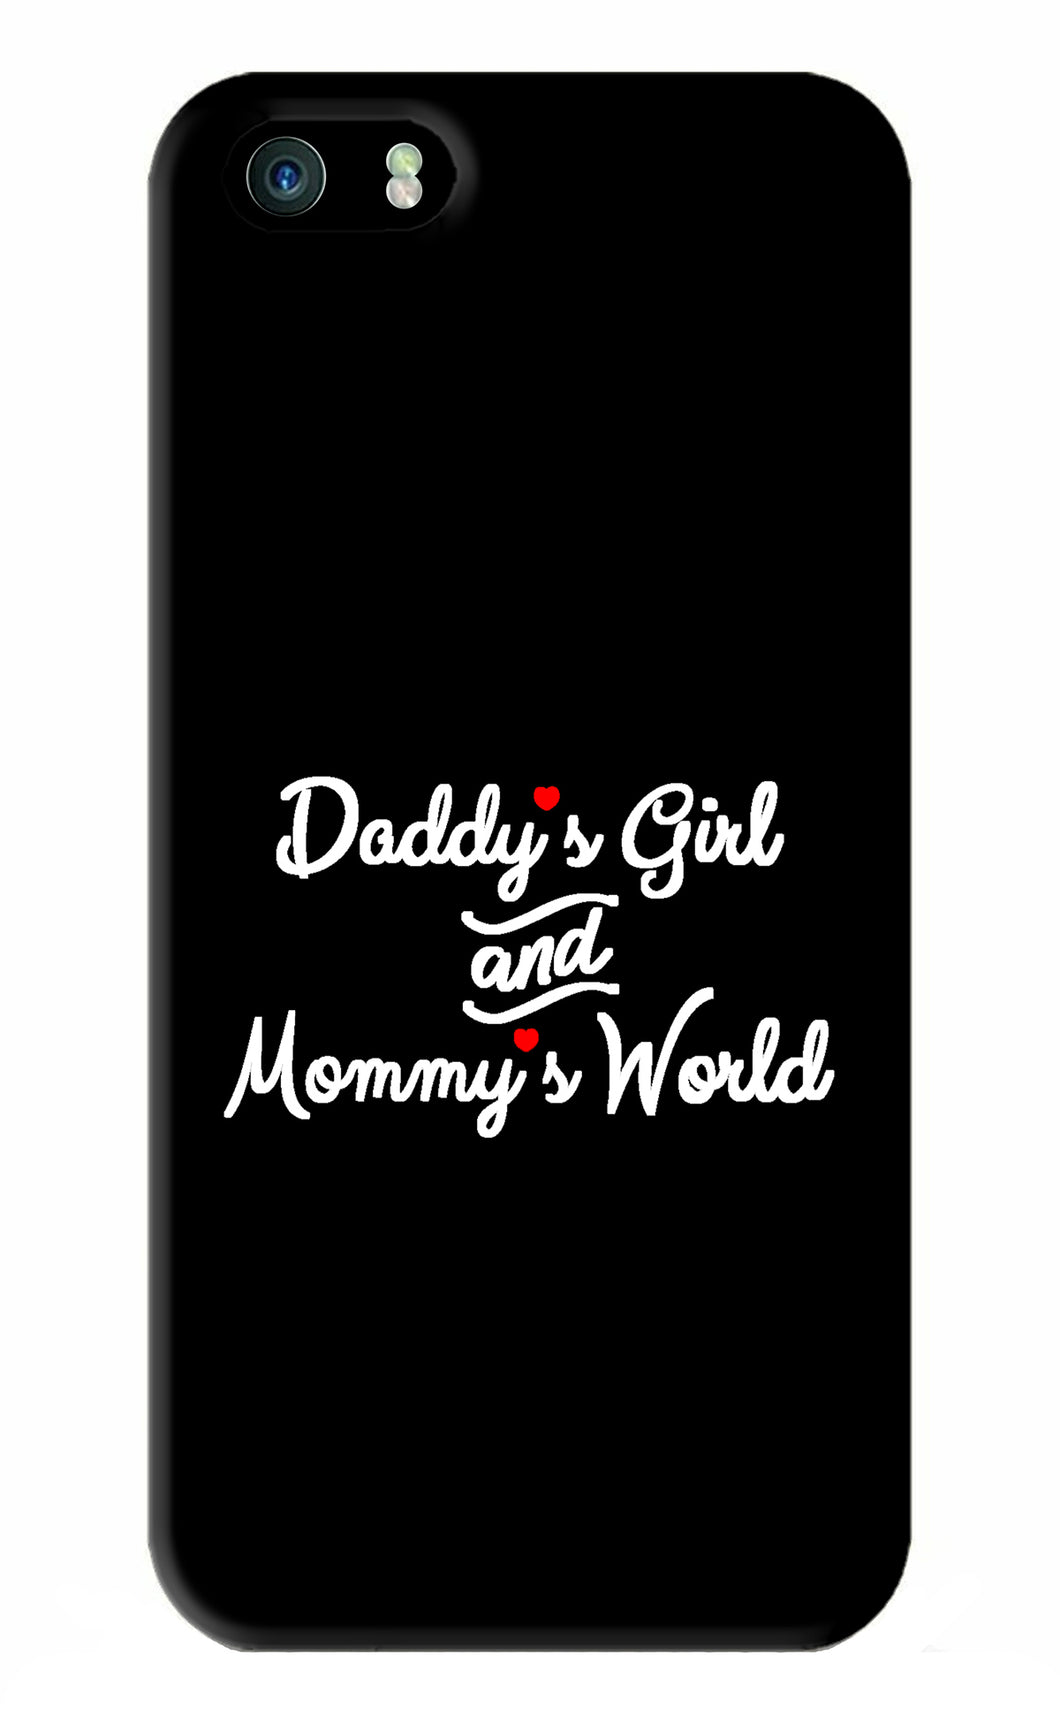 Daddy's Girl and Mommy's World iPhone 5S Back Skin Wrap